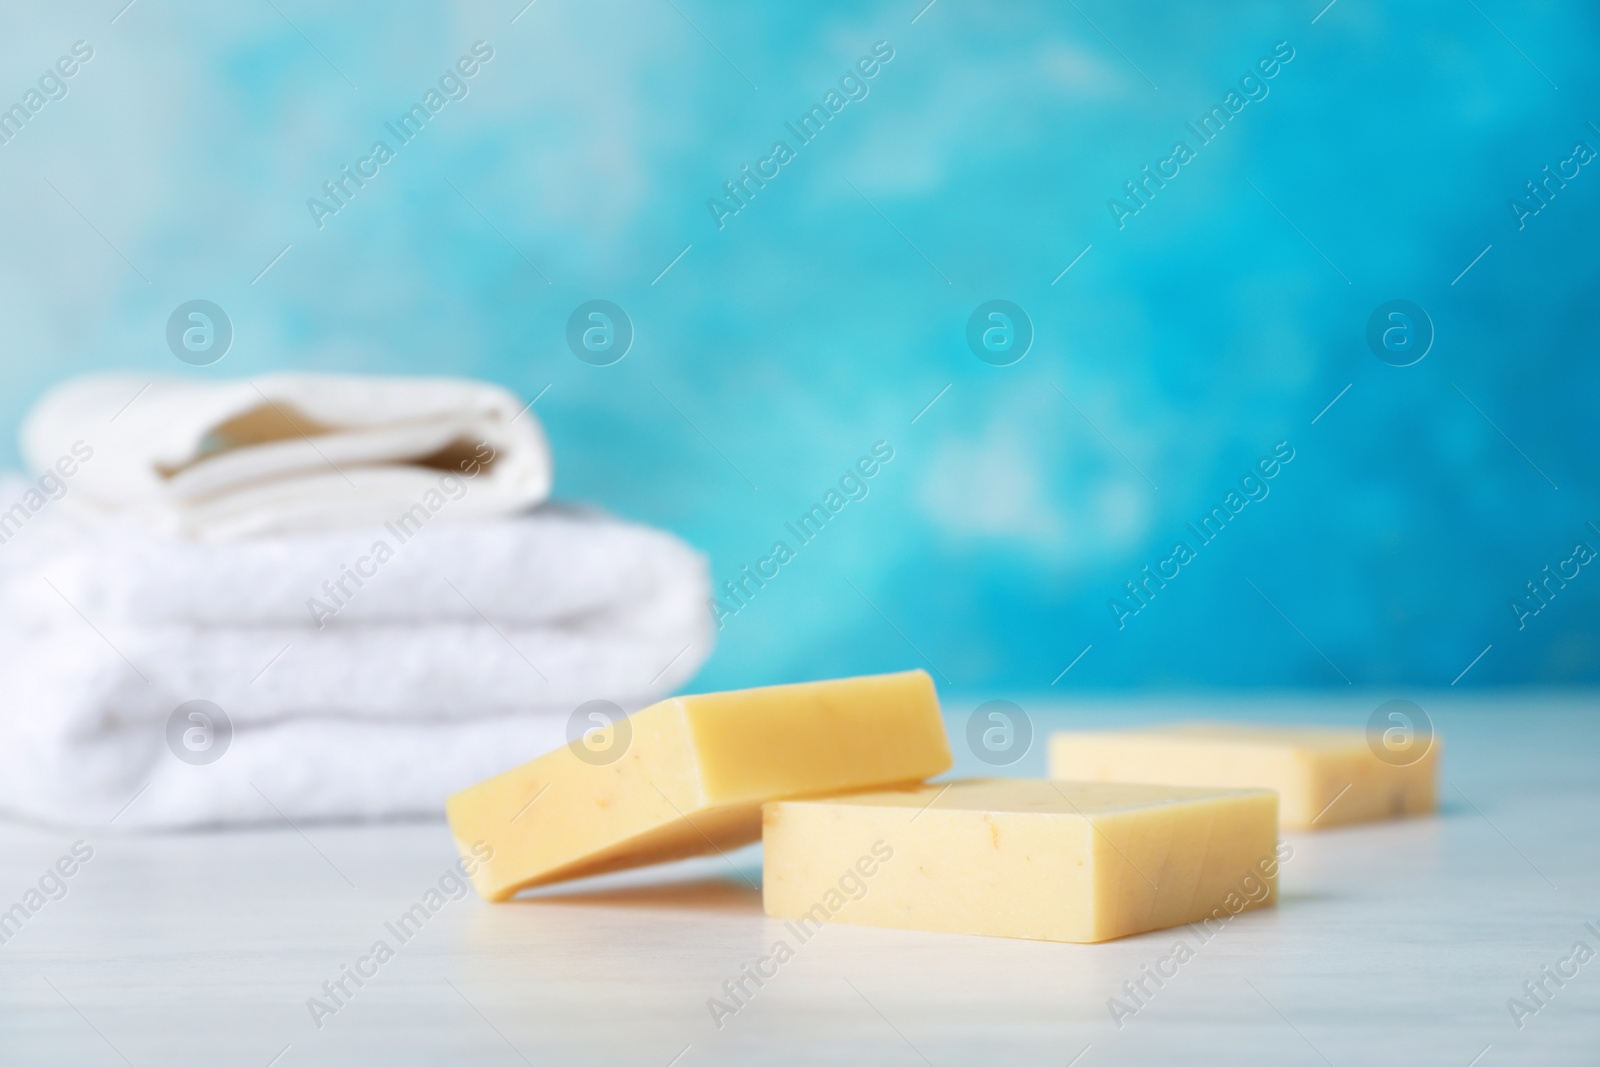 Photo of Handmade soap bars on table against color background. Space for text